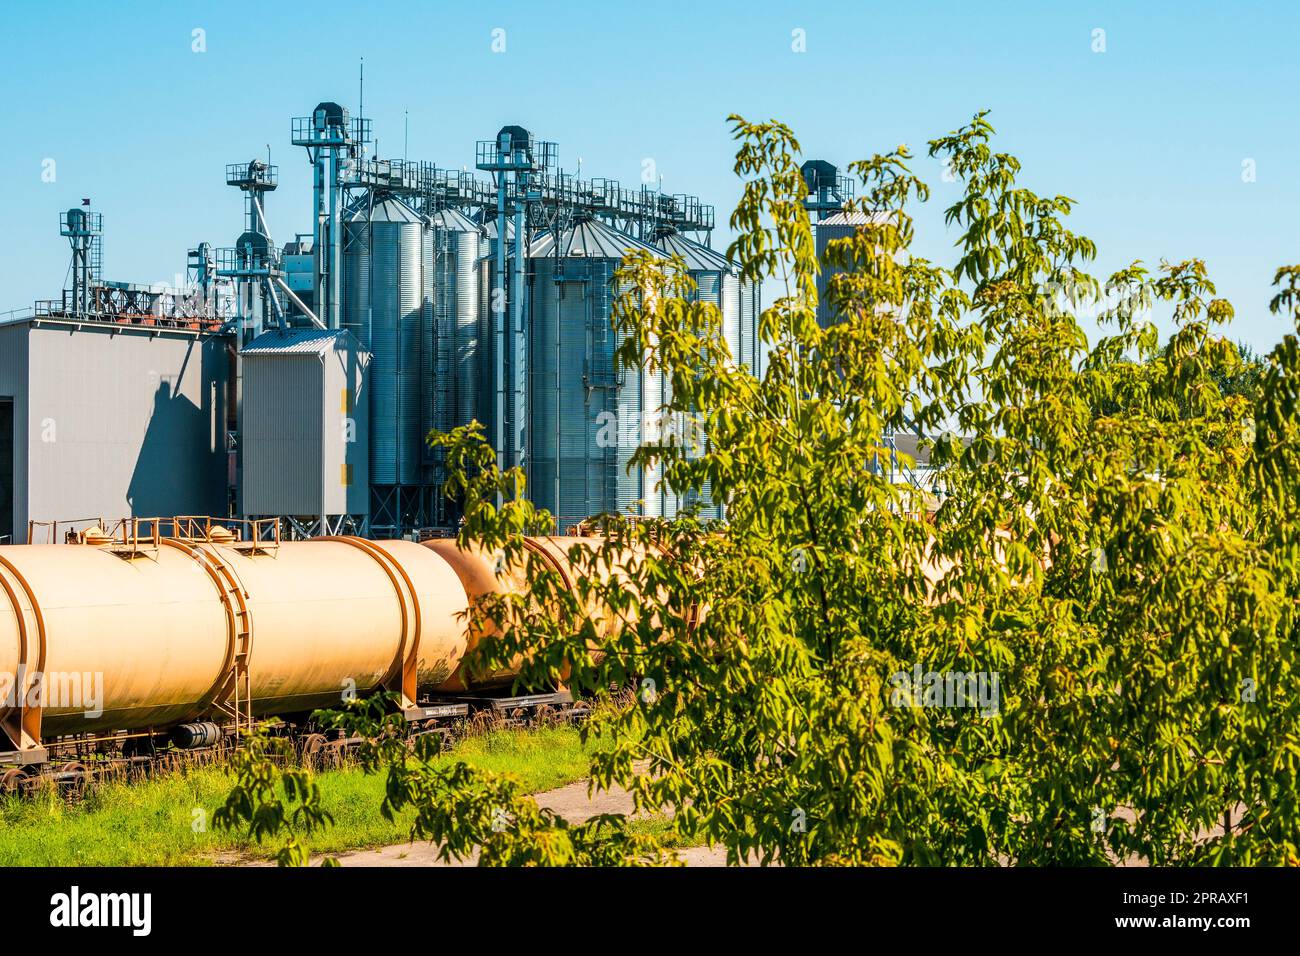 Set of train tanks next to plant for grain processing Stock Photo